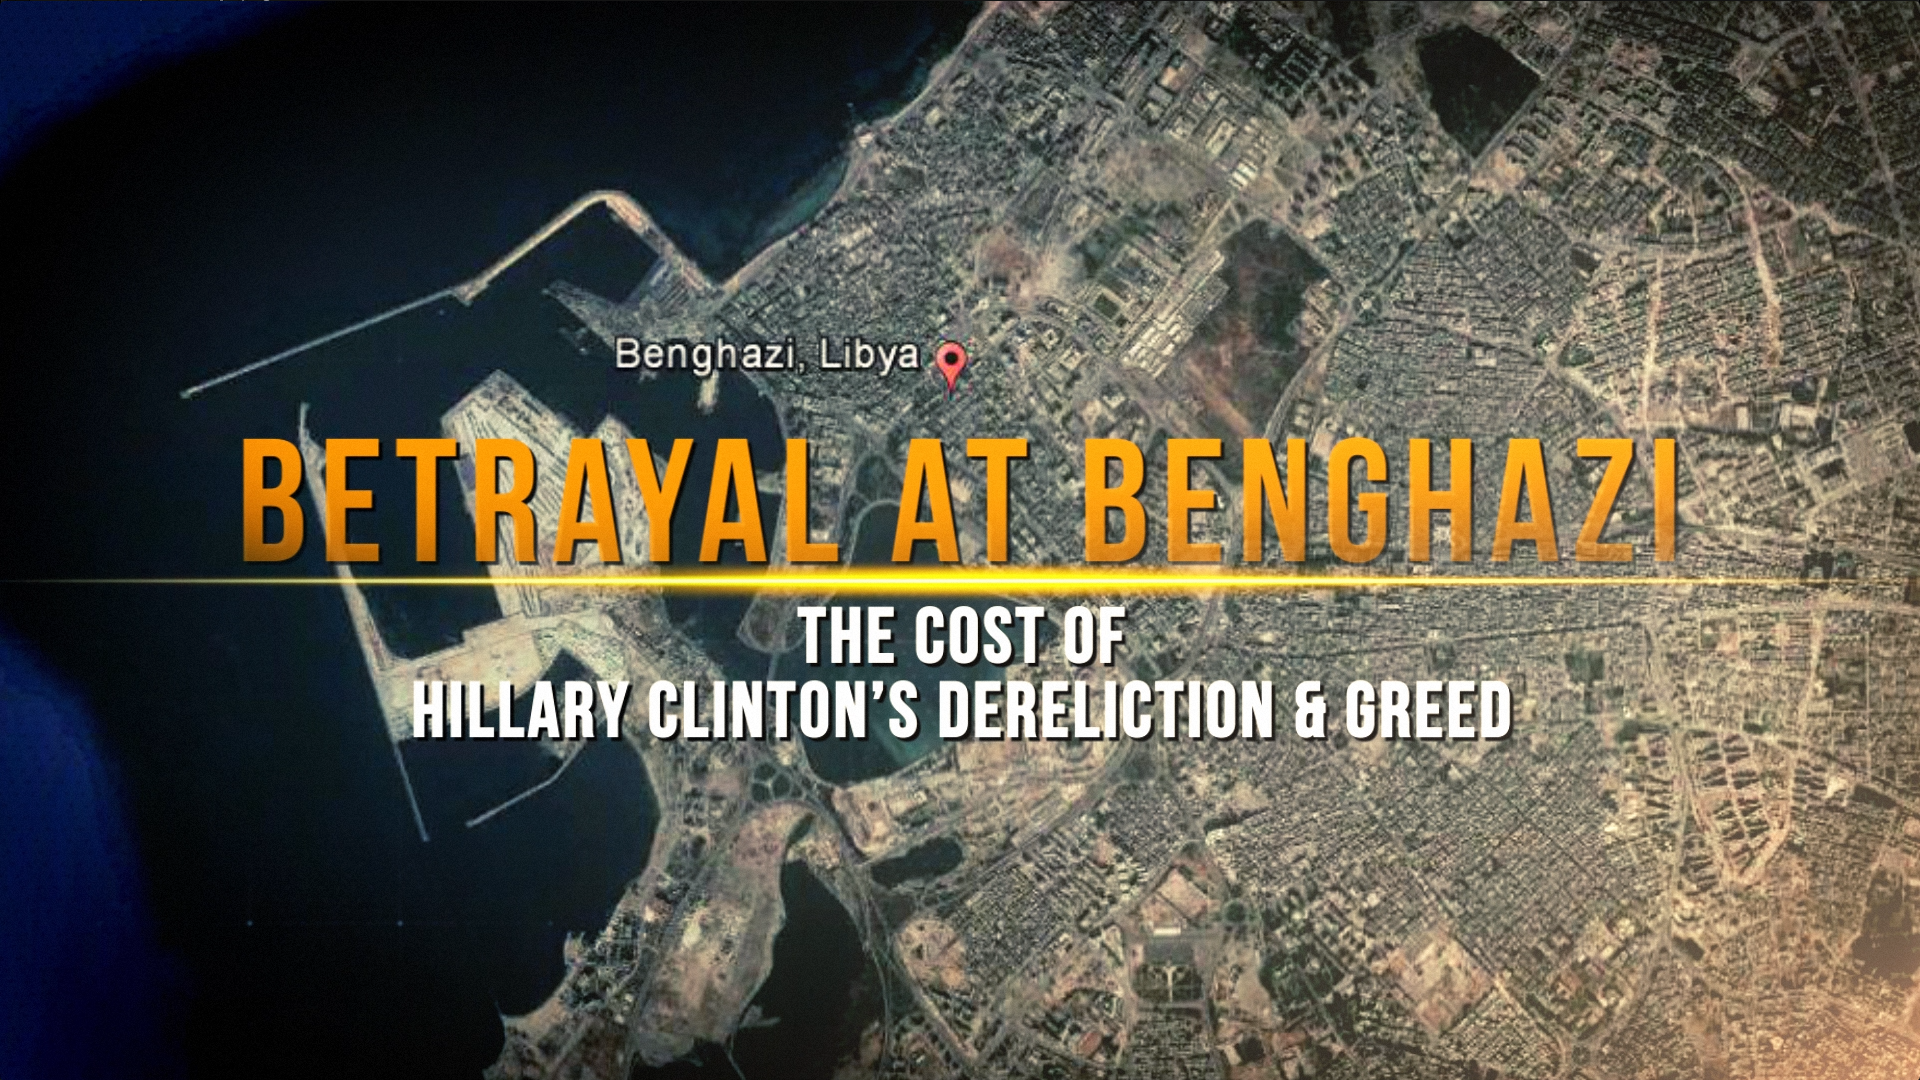 Benghazi-Opening-Title-still.png